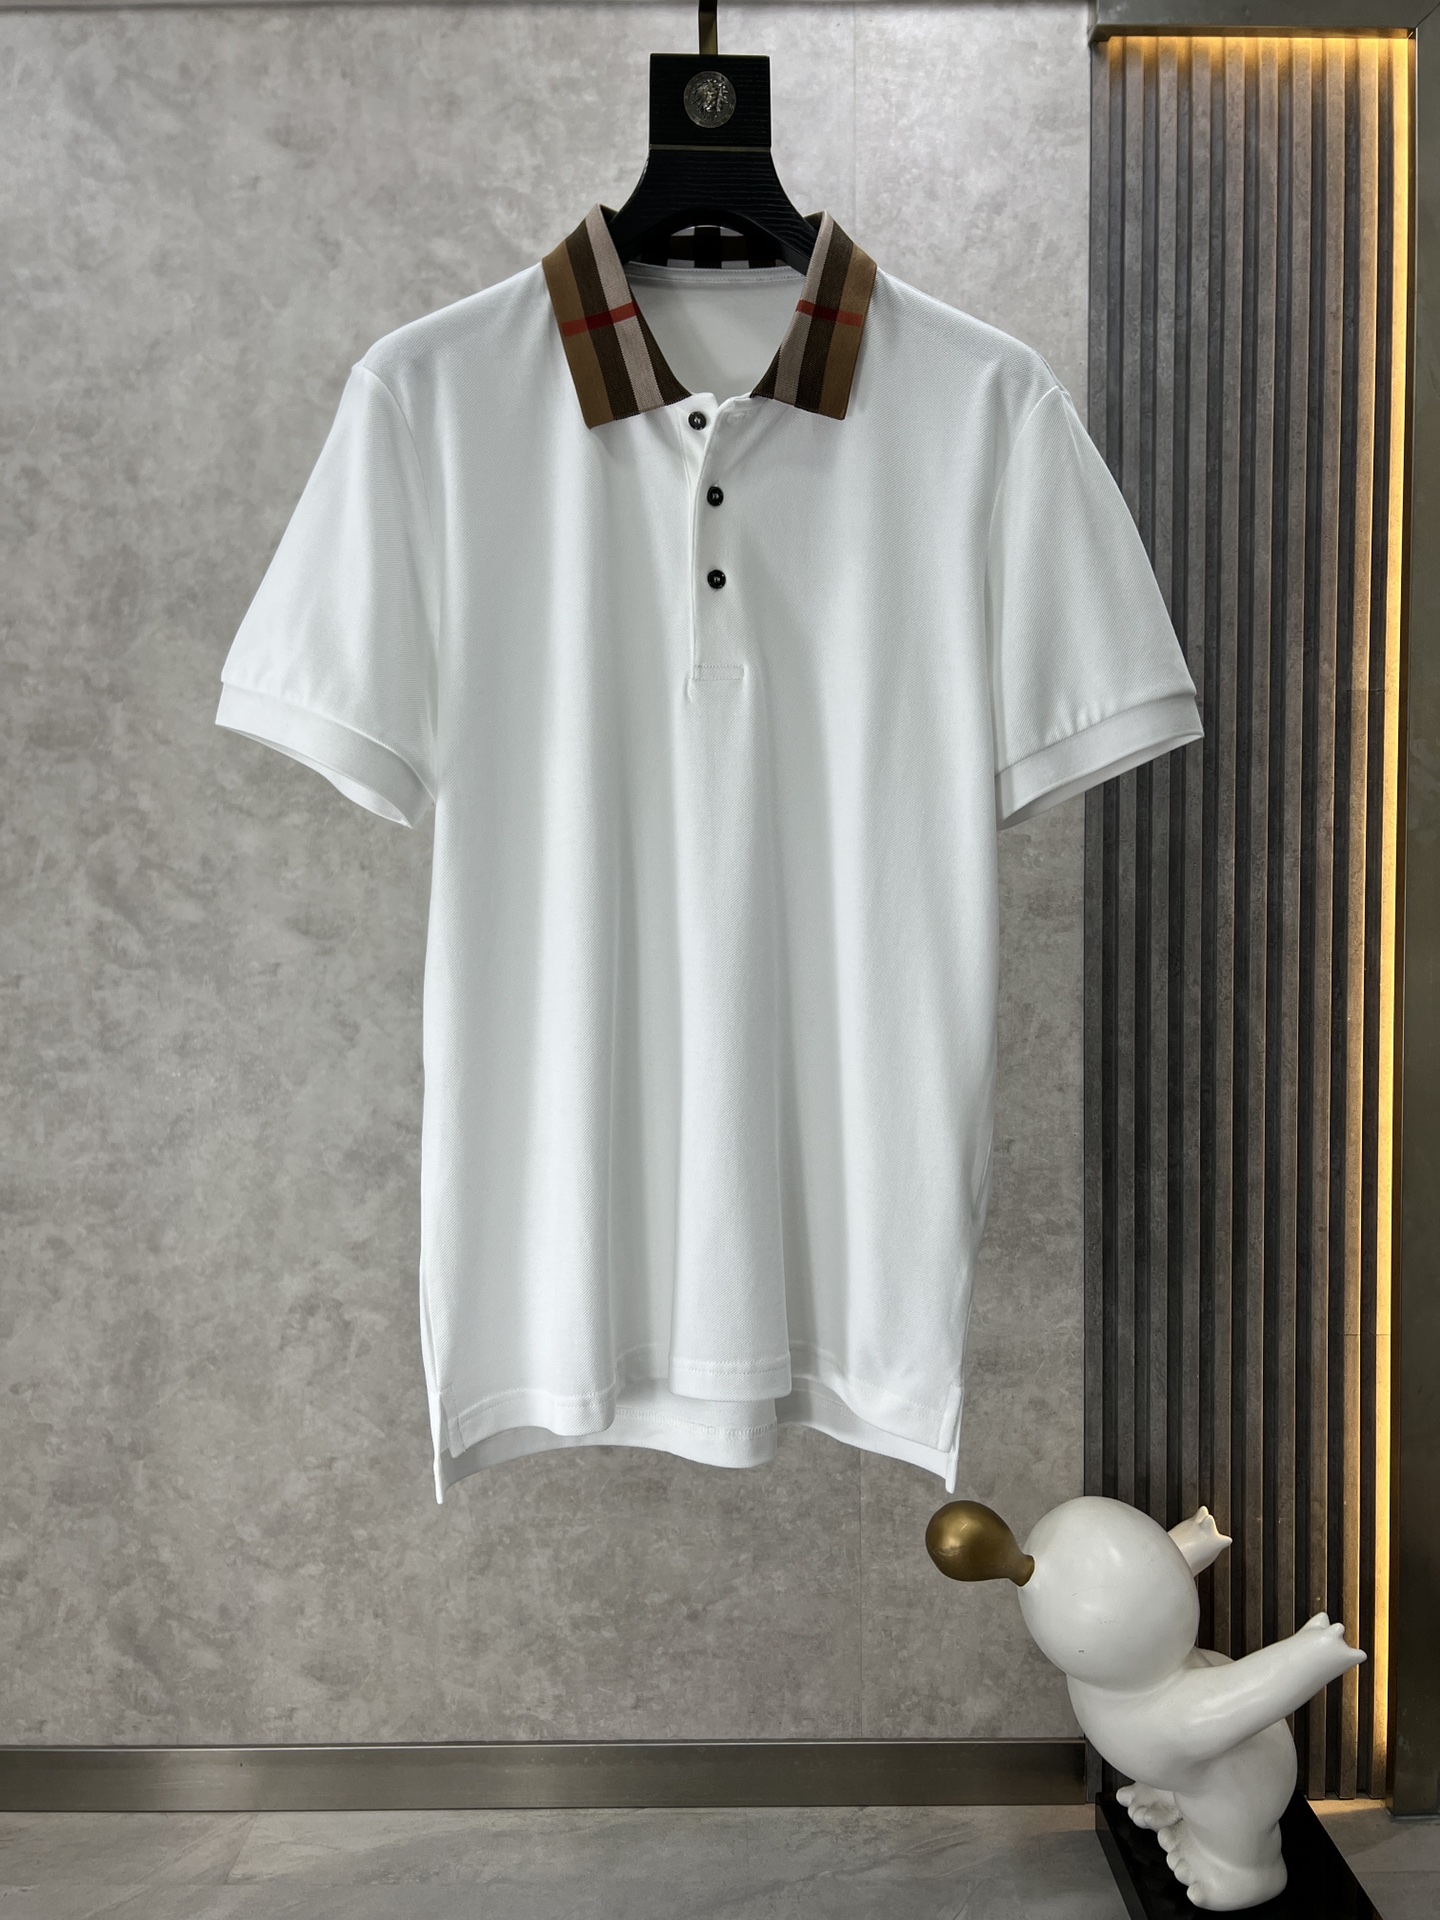 Burberry Clothing Polo T-Shirt Replica Online
 Embroidery Cotton Spring/Summer Collection Short Sleeve